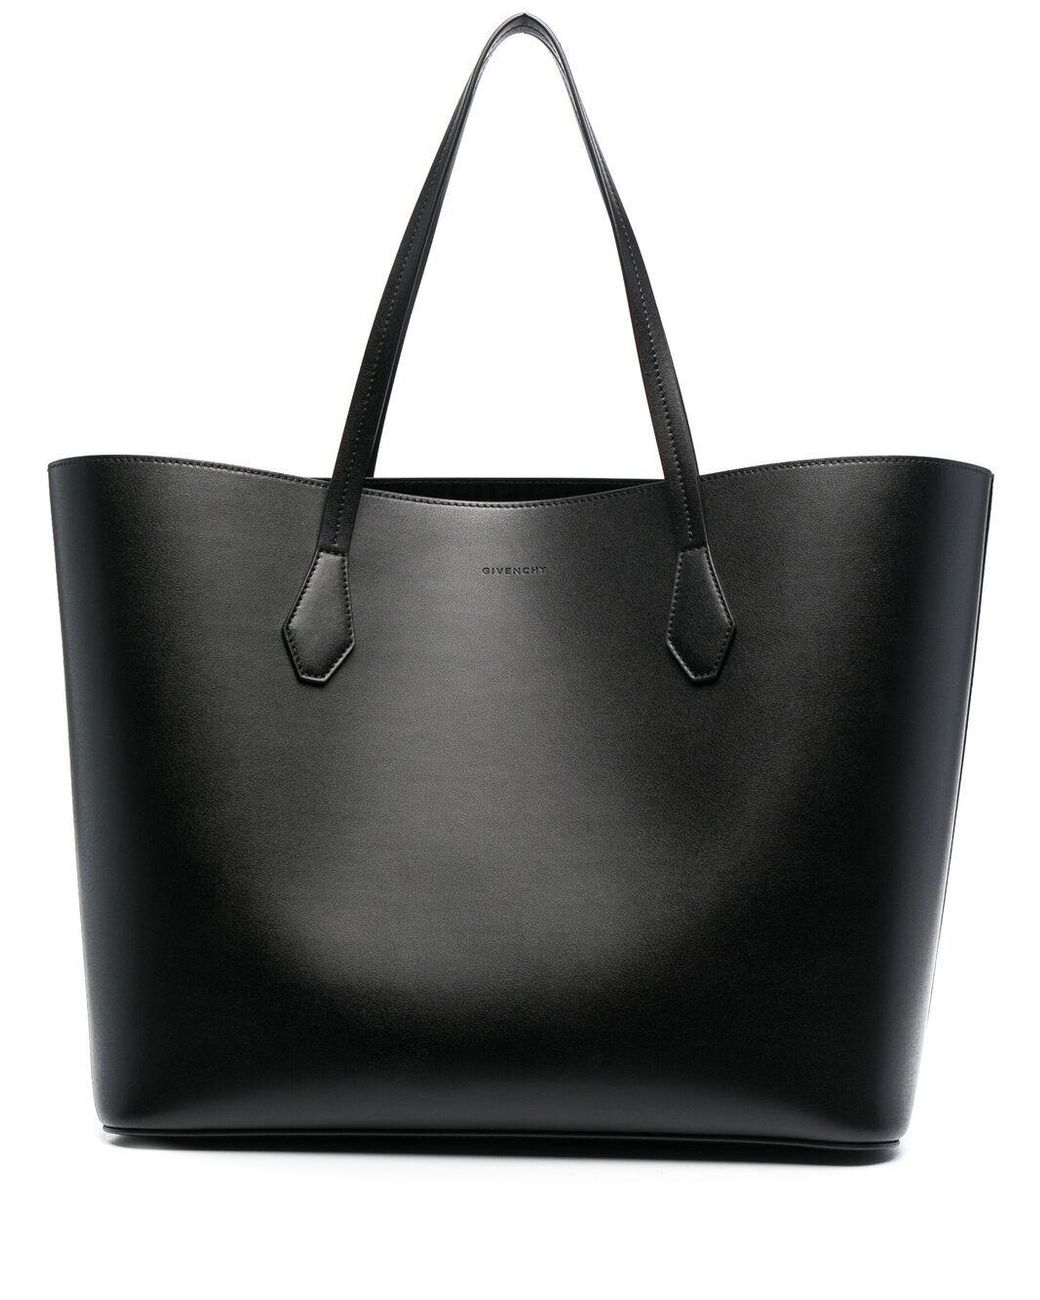 Givenchy Logo-embossed Leather Tote Bag in Black - Save 18% - Lyst